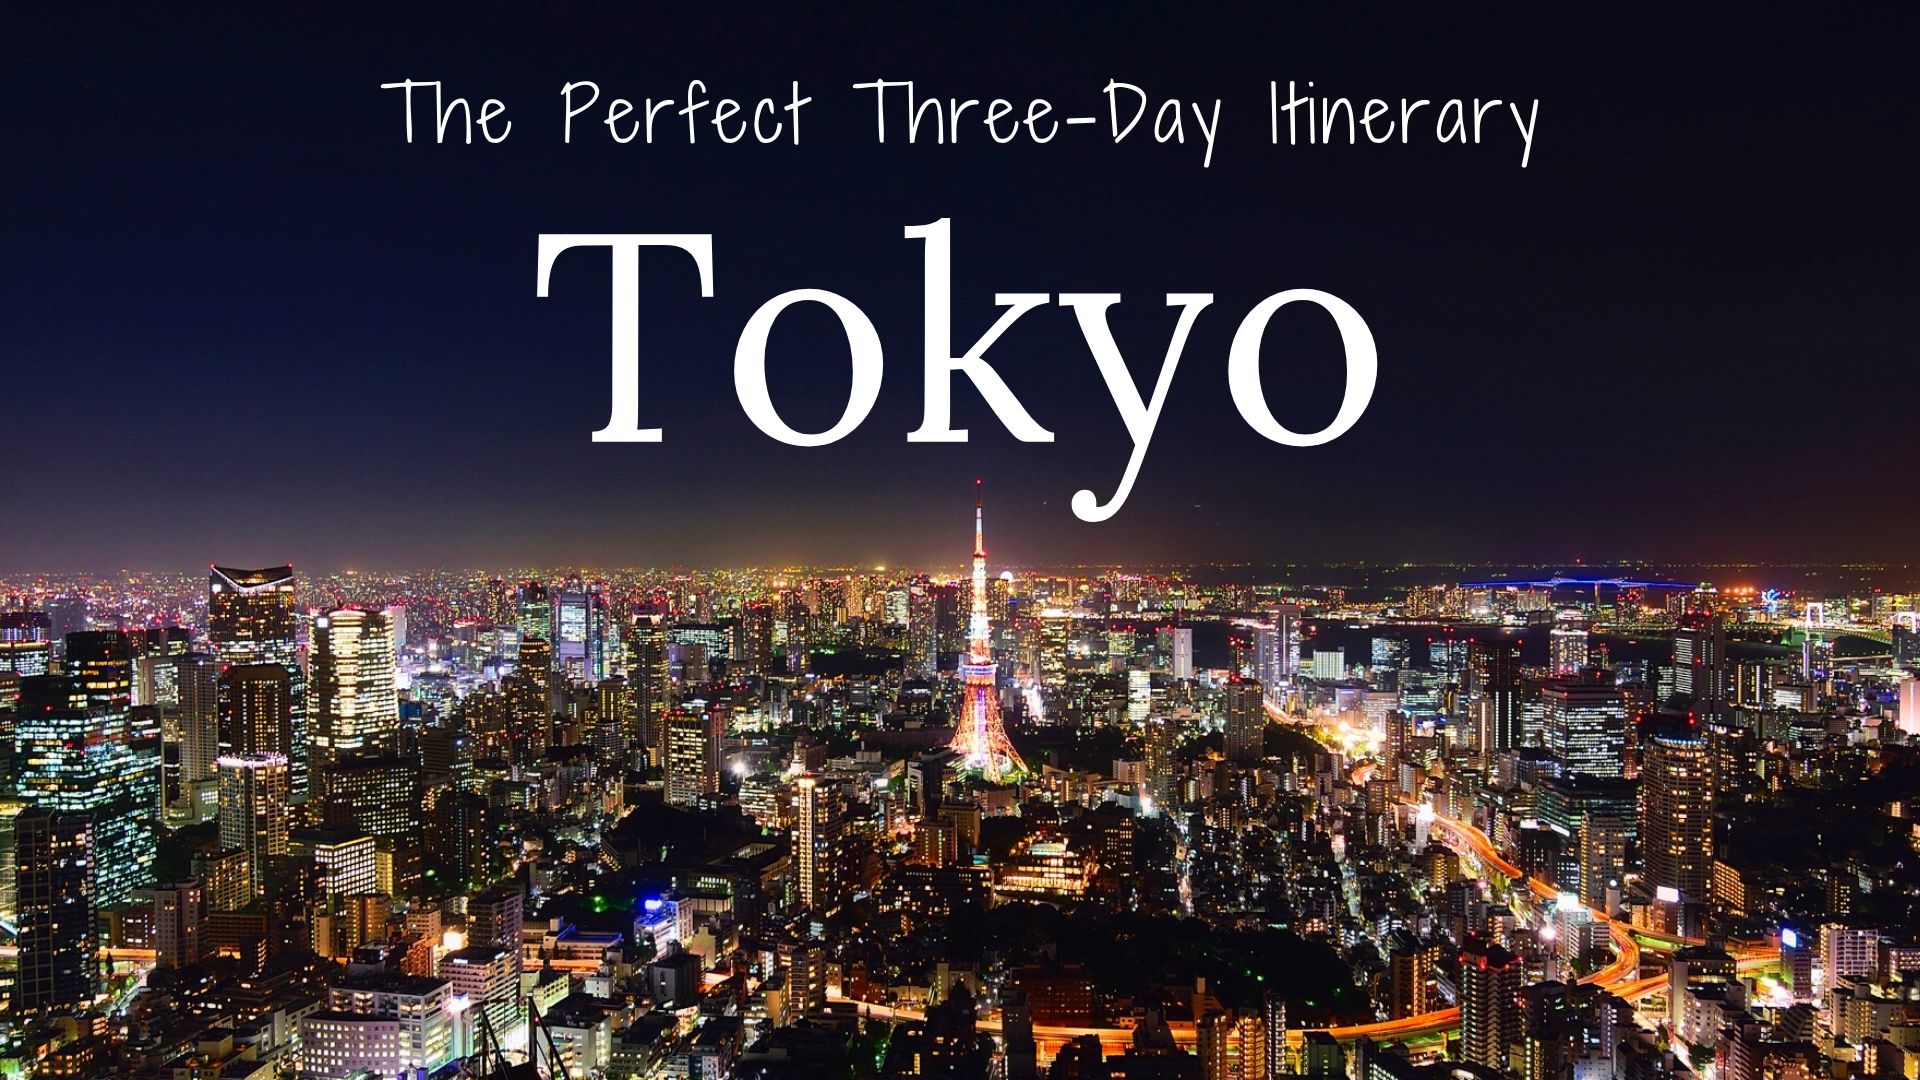 Three Days in Tokyo: The Ultimate Itinerary